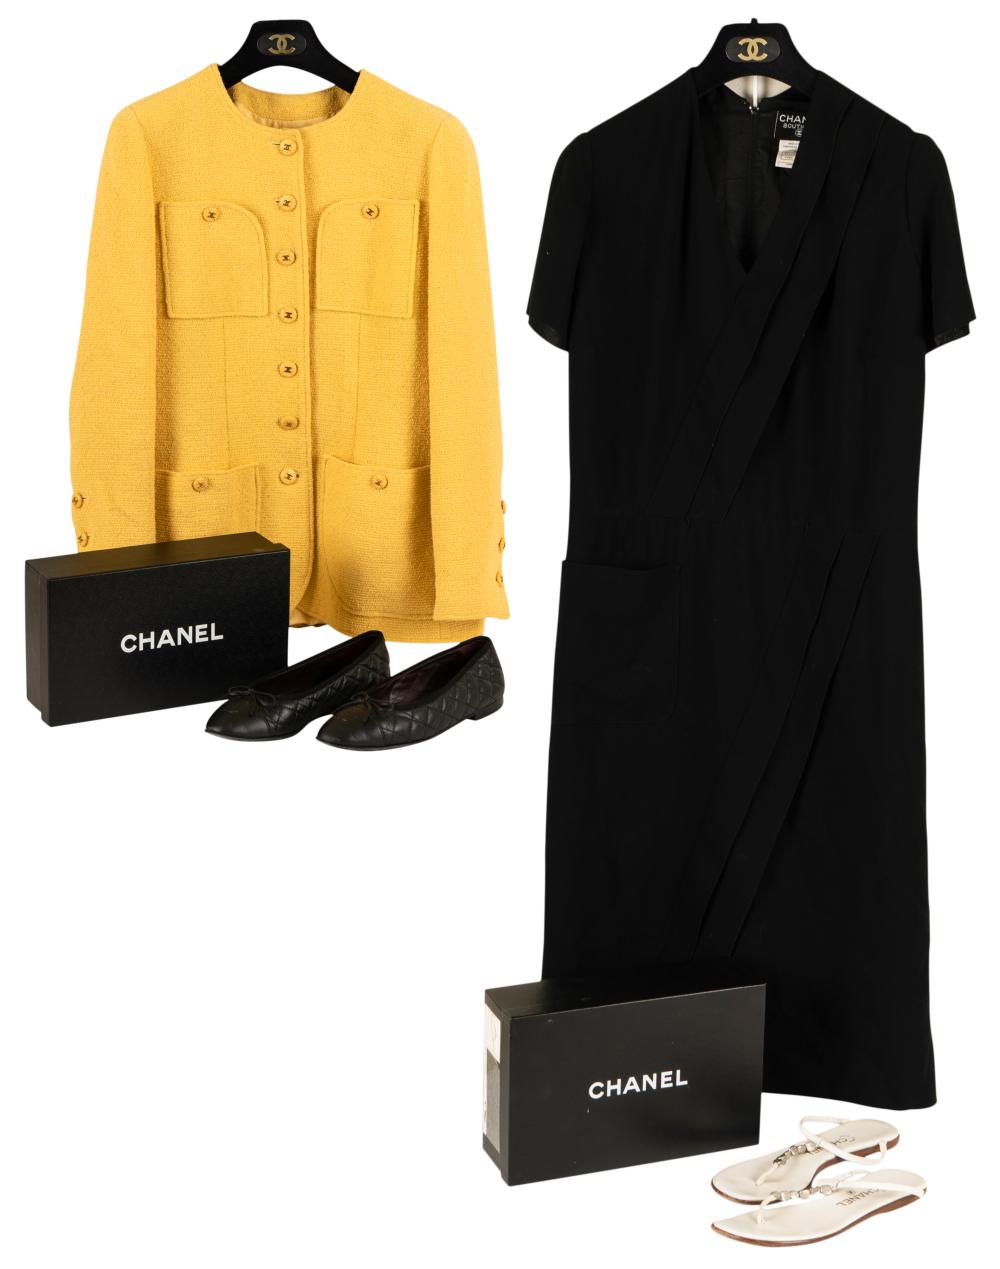 COLLECTION OF CHANEL BOUTIQUE CLOTHING 3052d1